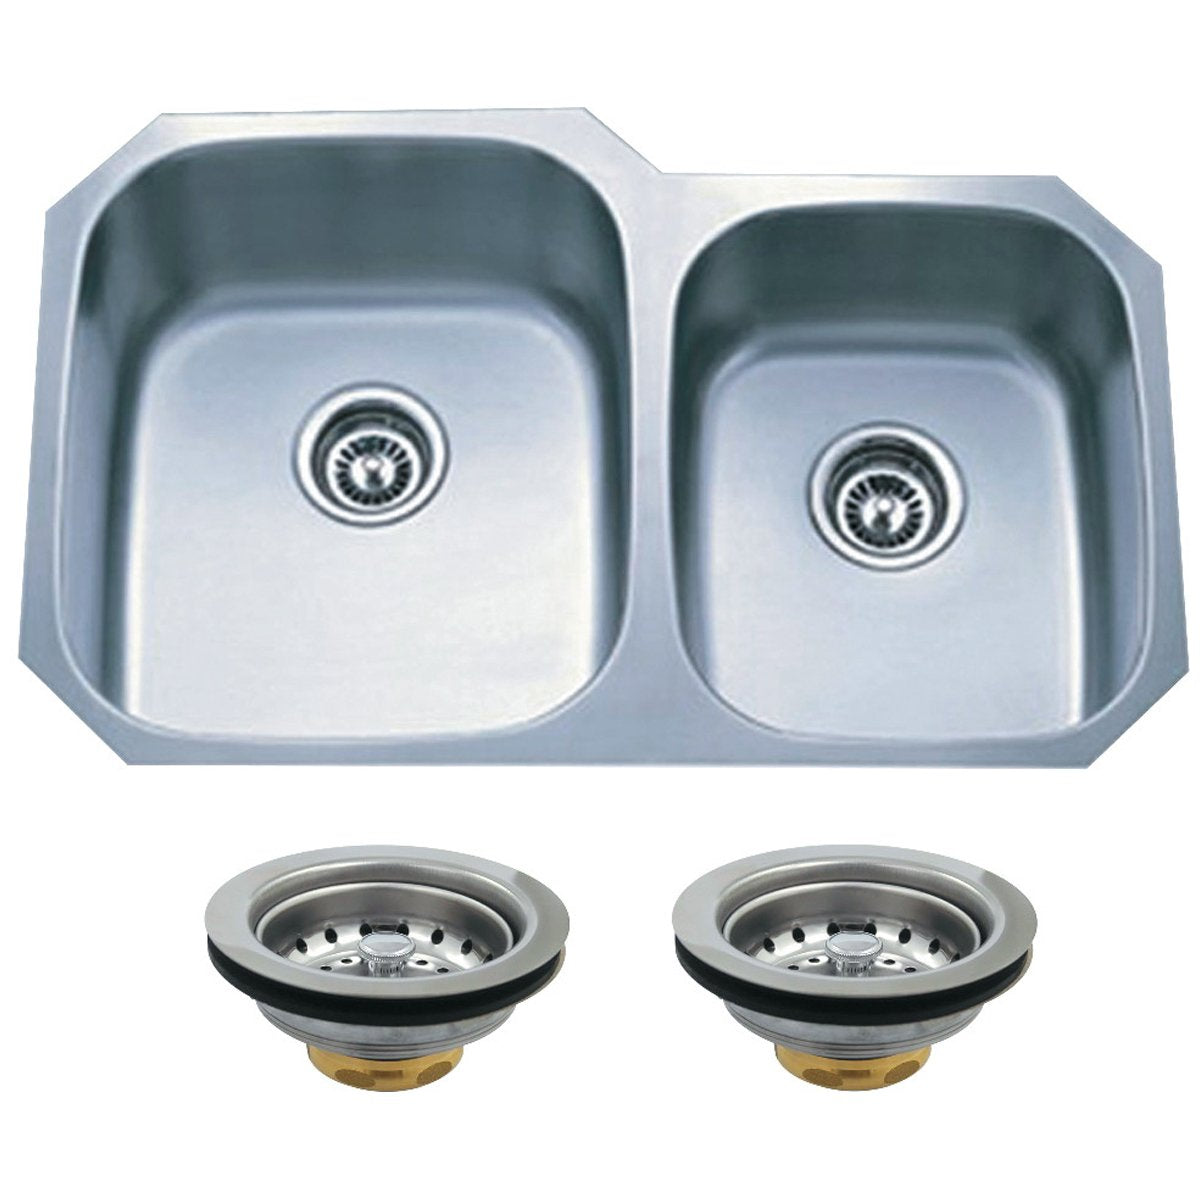 Kingston Brass 32.31" x 18.5" x 9" Undermount Stainless Steel Double Bowl Kitchen Sink Combo with Strainers